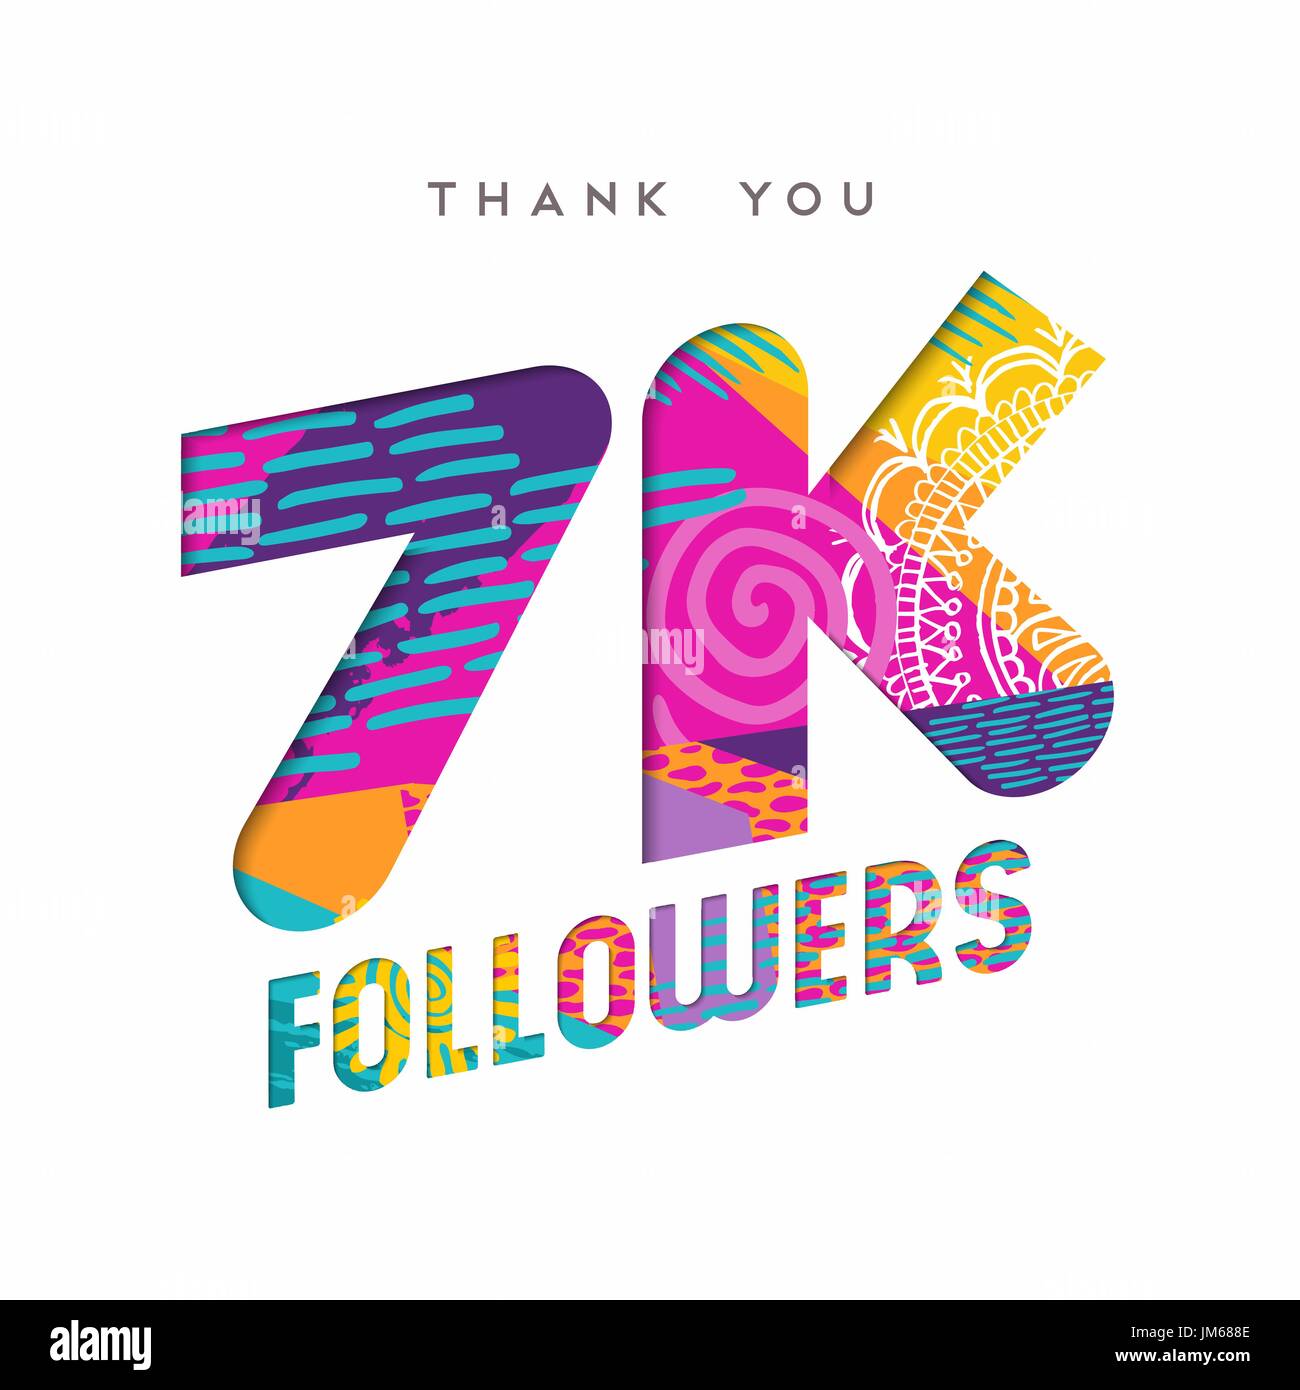 7000 followers thank you paper cut number illustration. Special 7k user goal celebration for seven thousand social media friends, fans or subscribers. Stock Vector